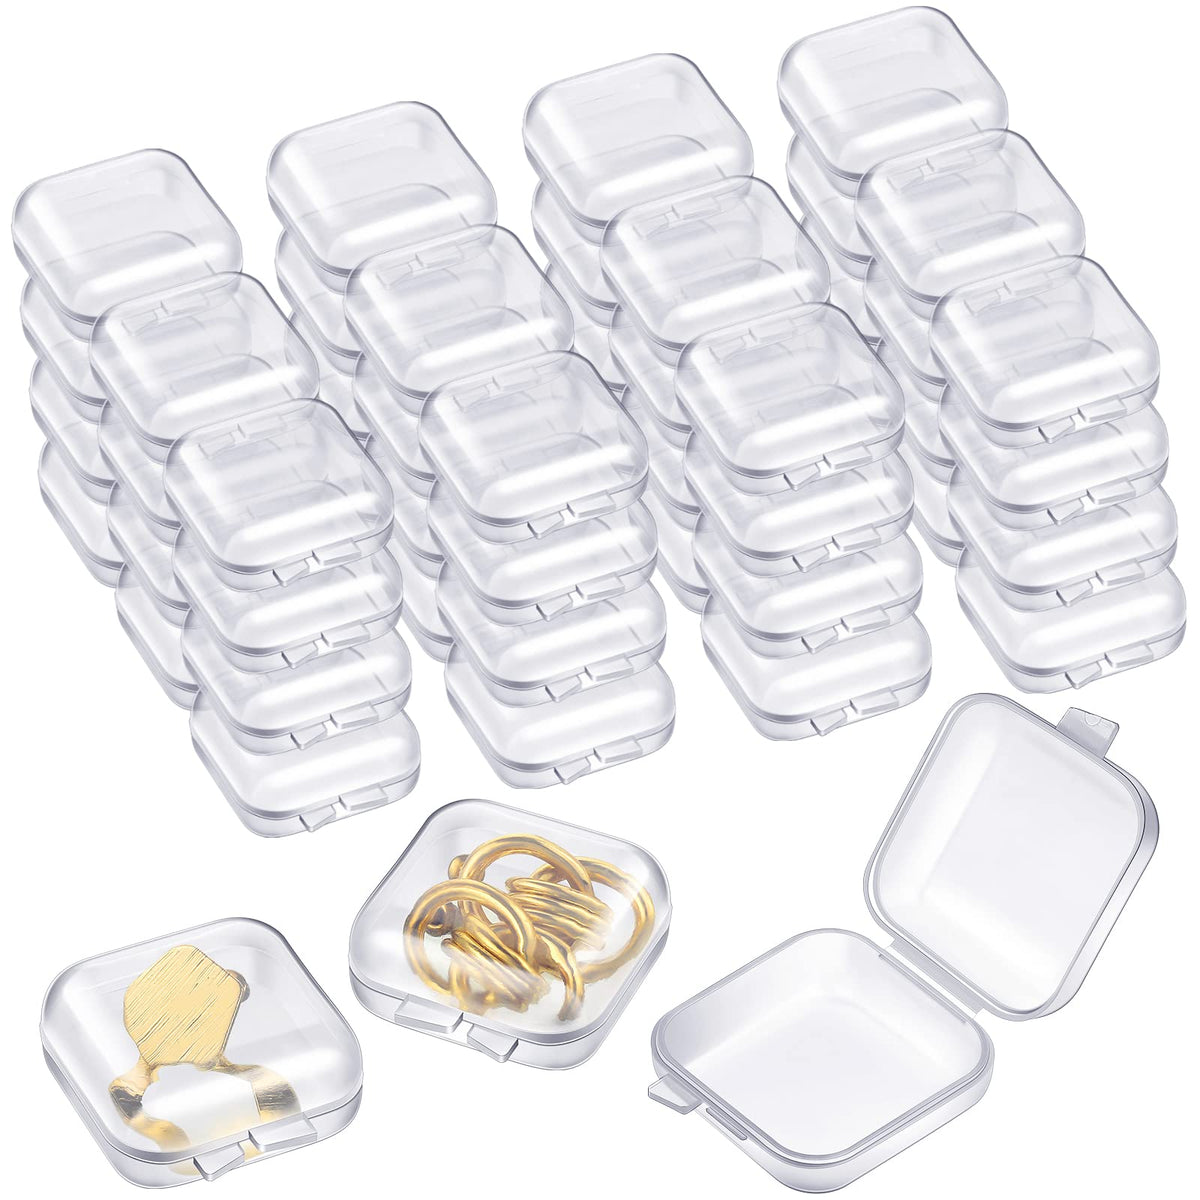 100 Pcs Clear Plastic Beads Storage Containers Box Small Clear Box with  Hinged Lid Small Plastic Case Mini Square Arts Crafts Storage Boxes  Organizers